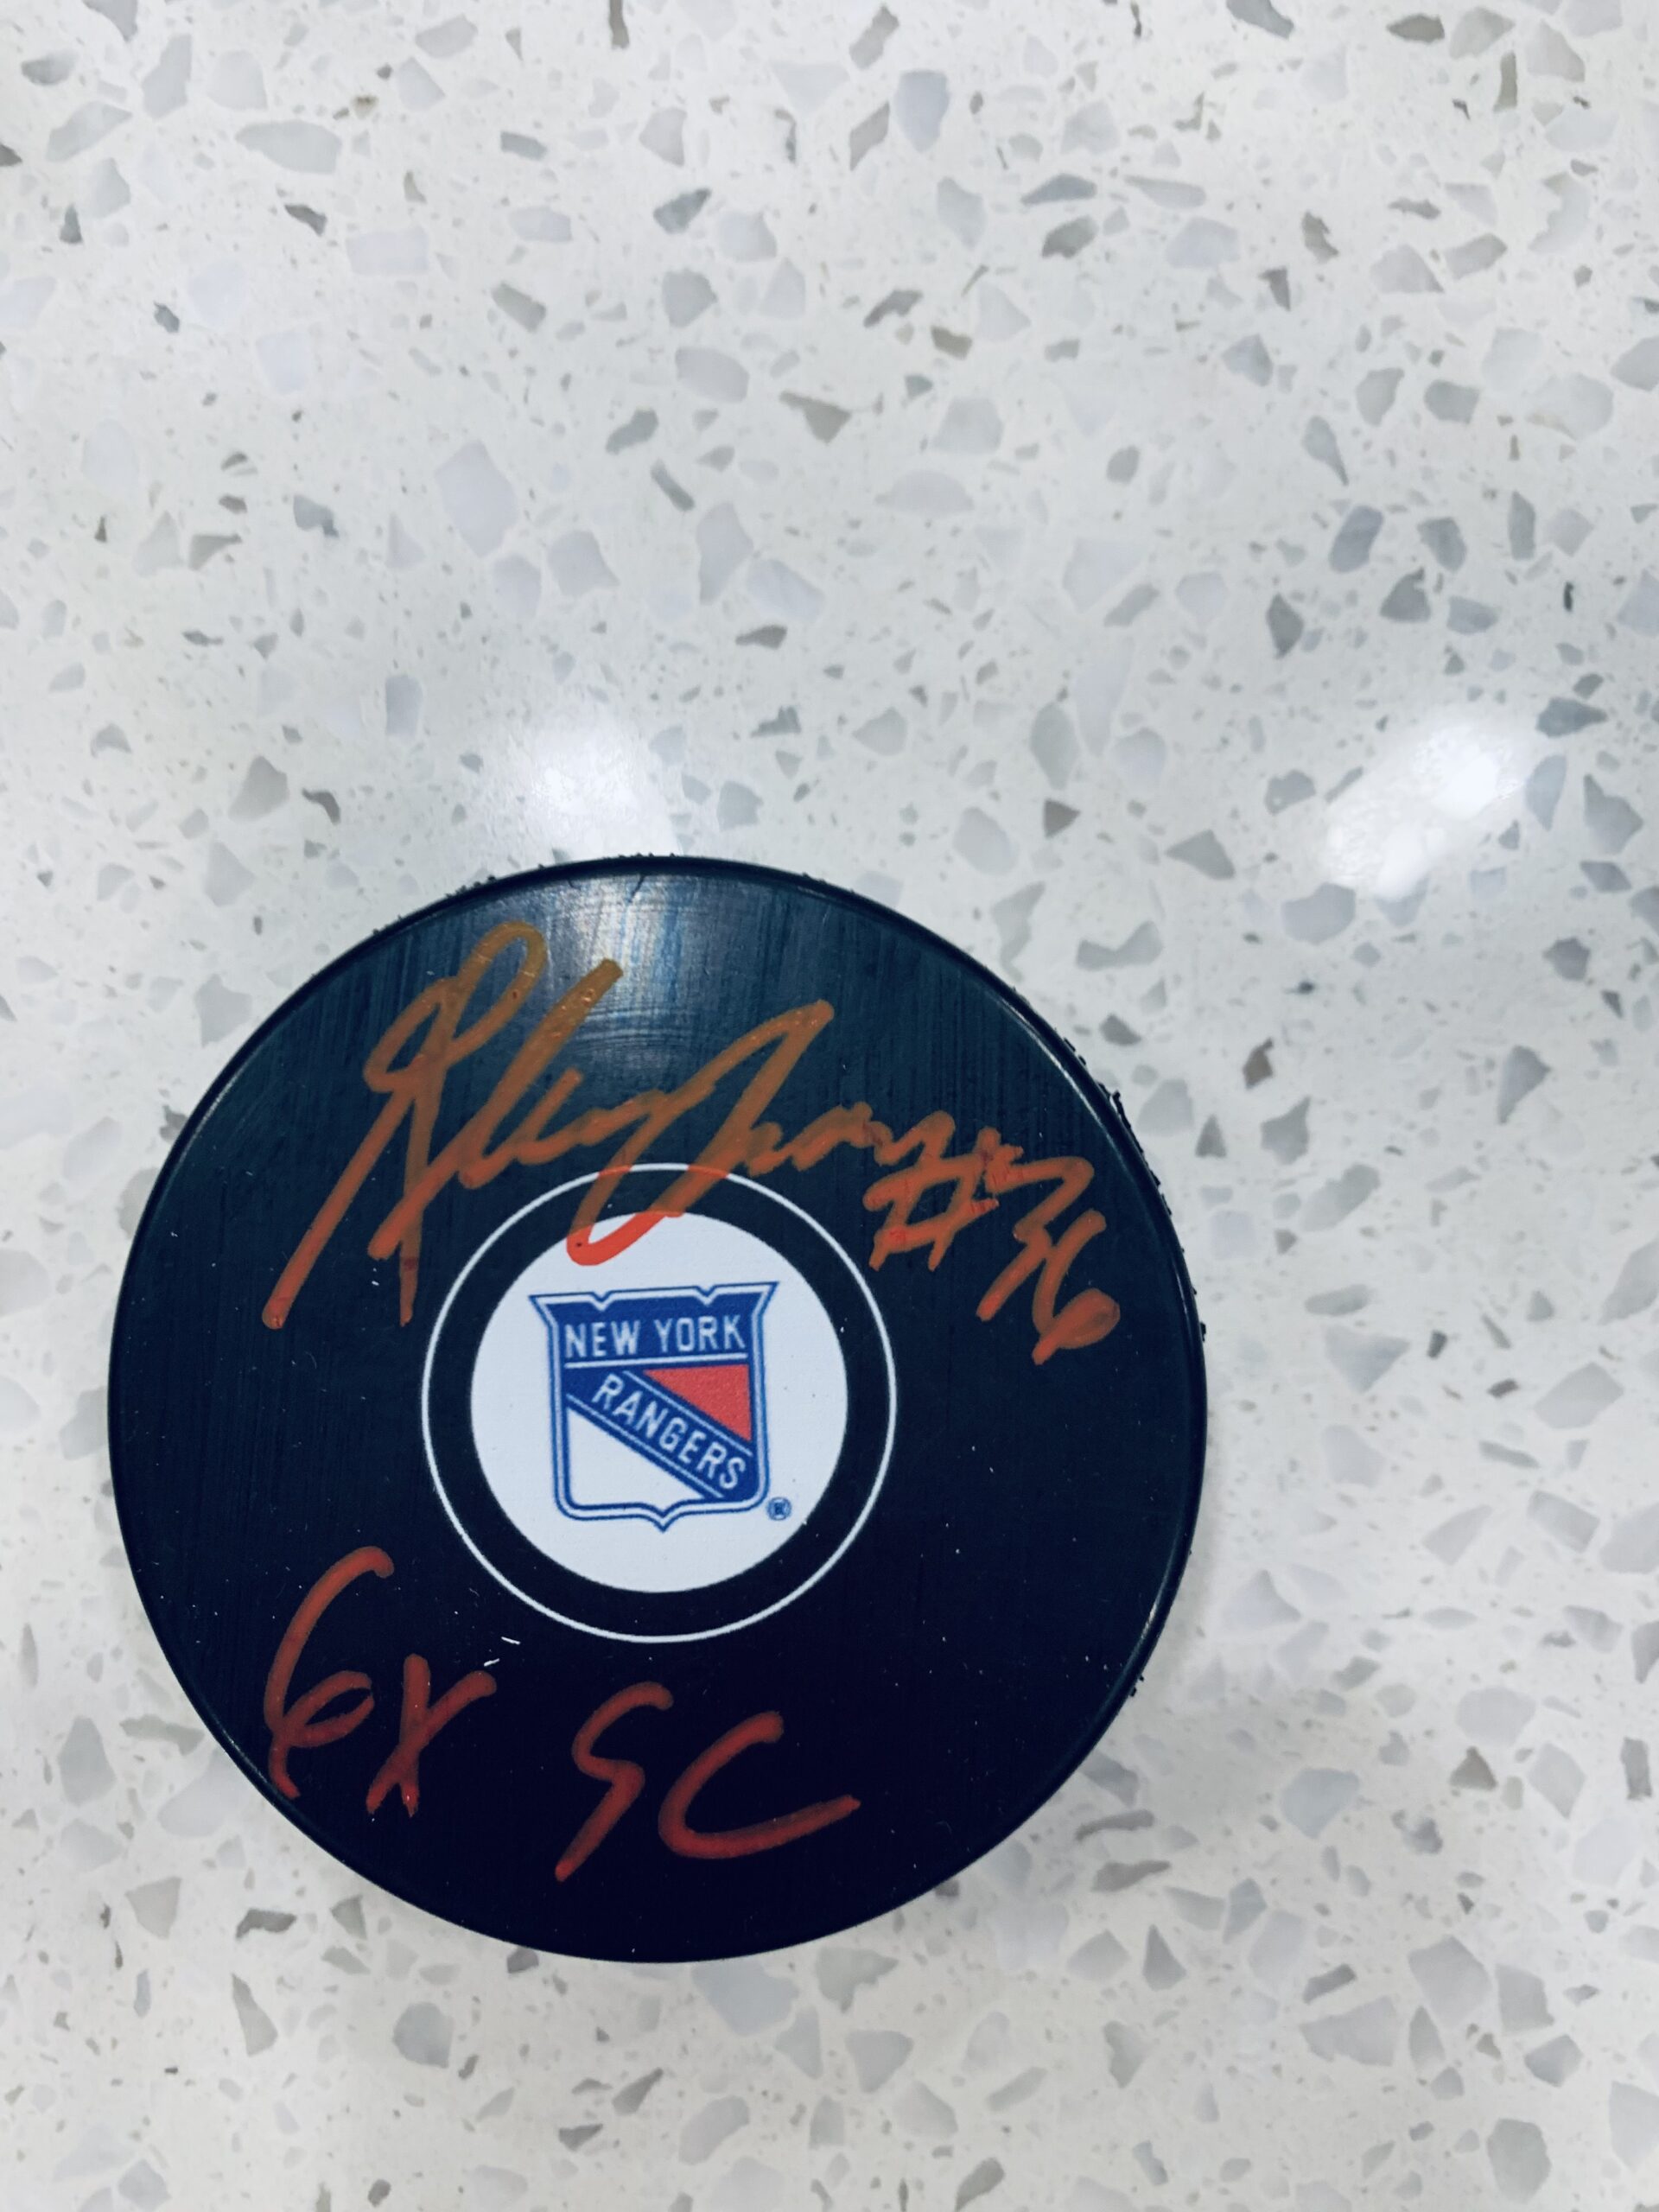 Glenn Anderson signed puck - sports collectibles and memorabilia